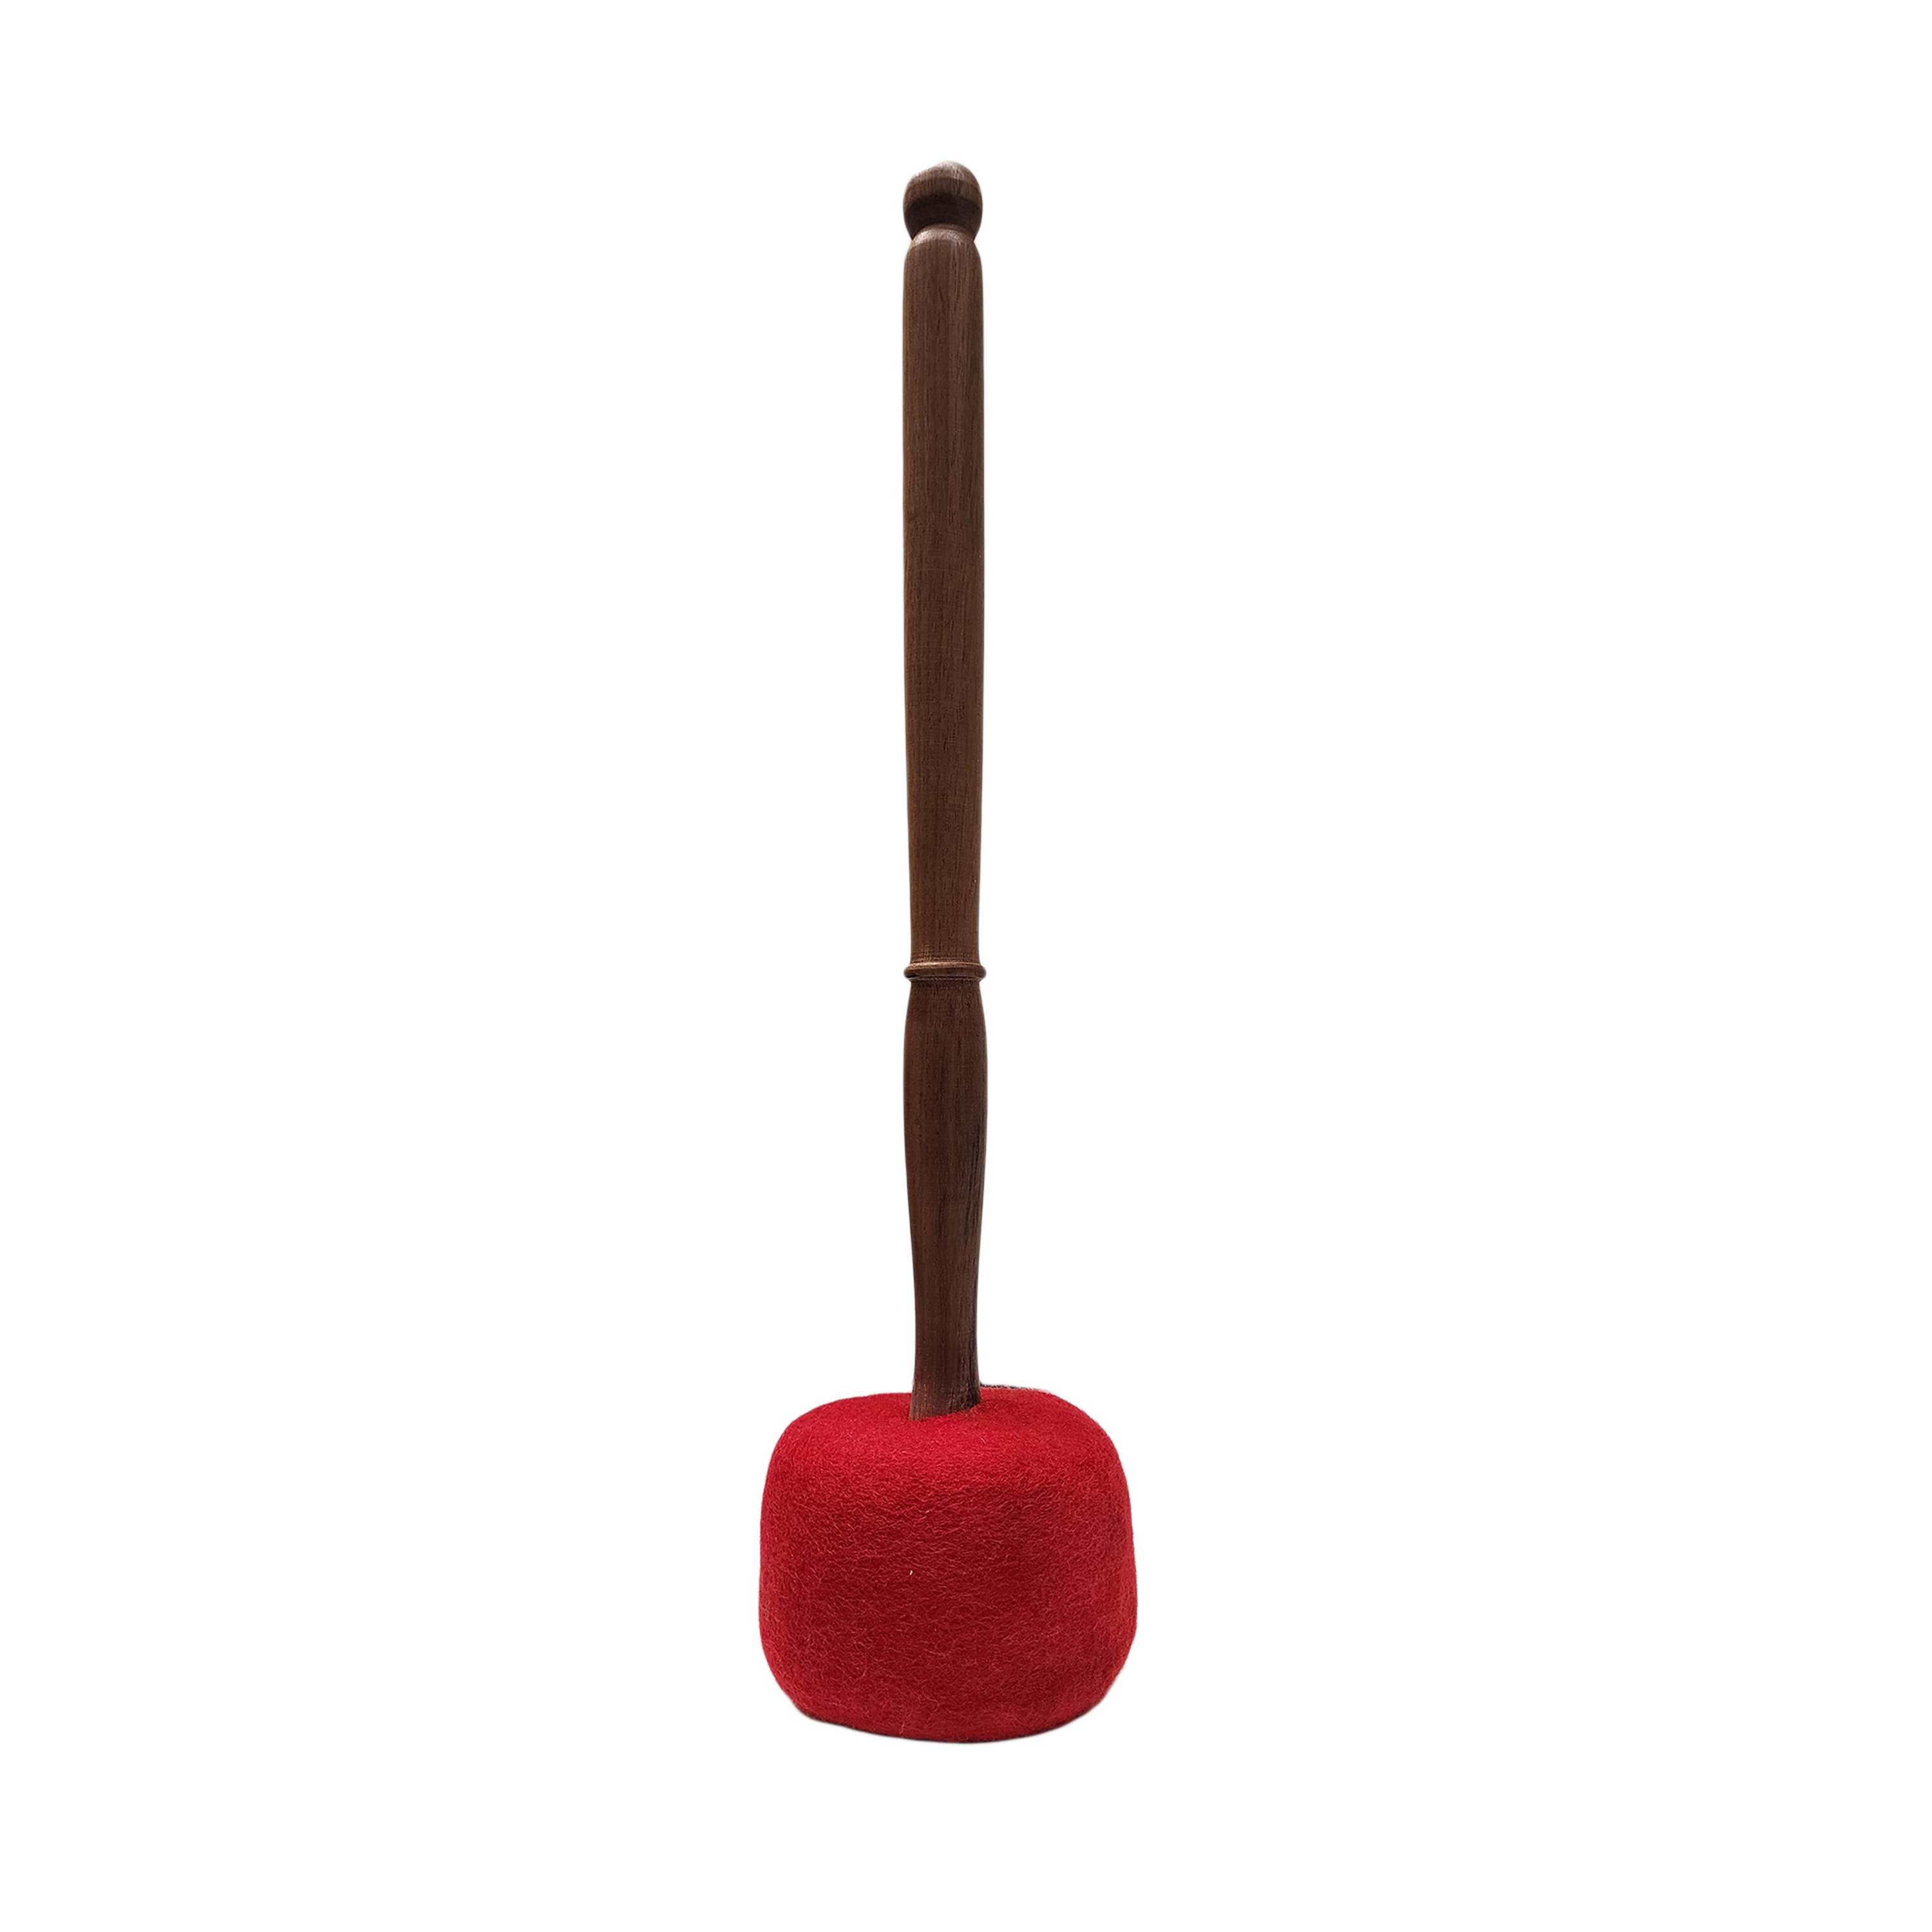 Singing Bowl Accessories, Soft Felt Beating Mallet, Large